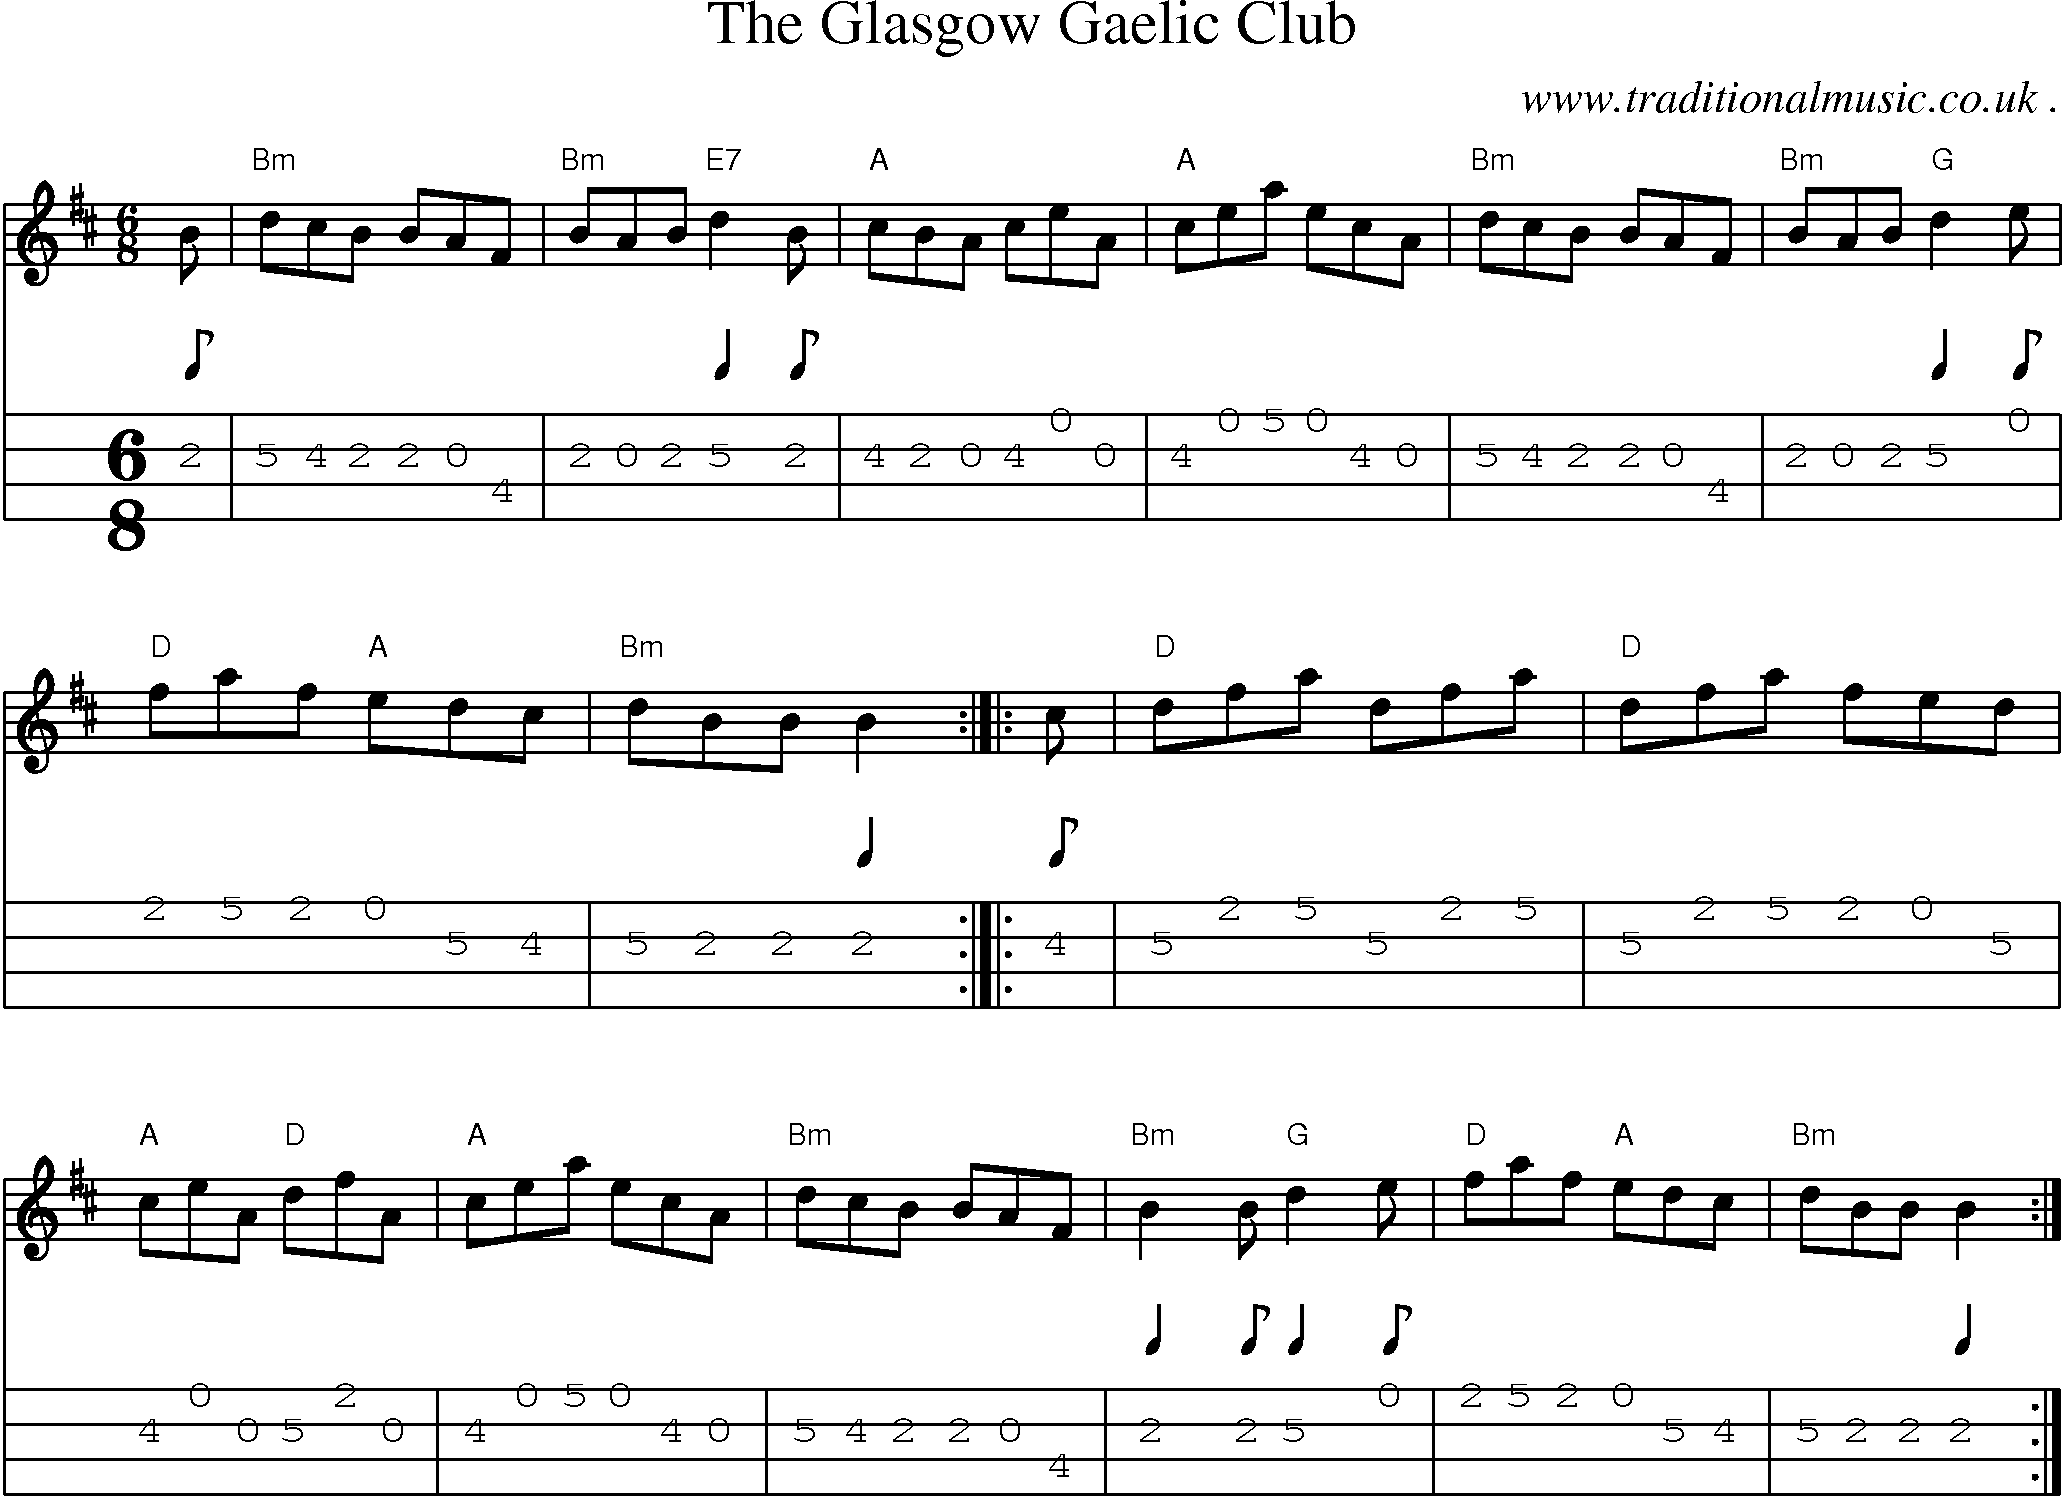 Sheet-music  score, Chords and Mandolin Tabs for The Glasgow Gaelic Club